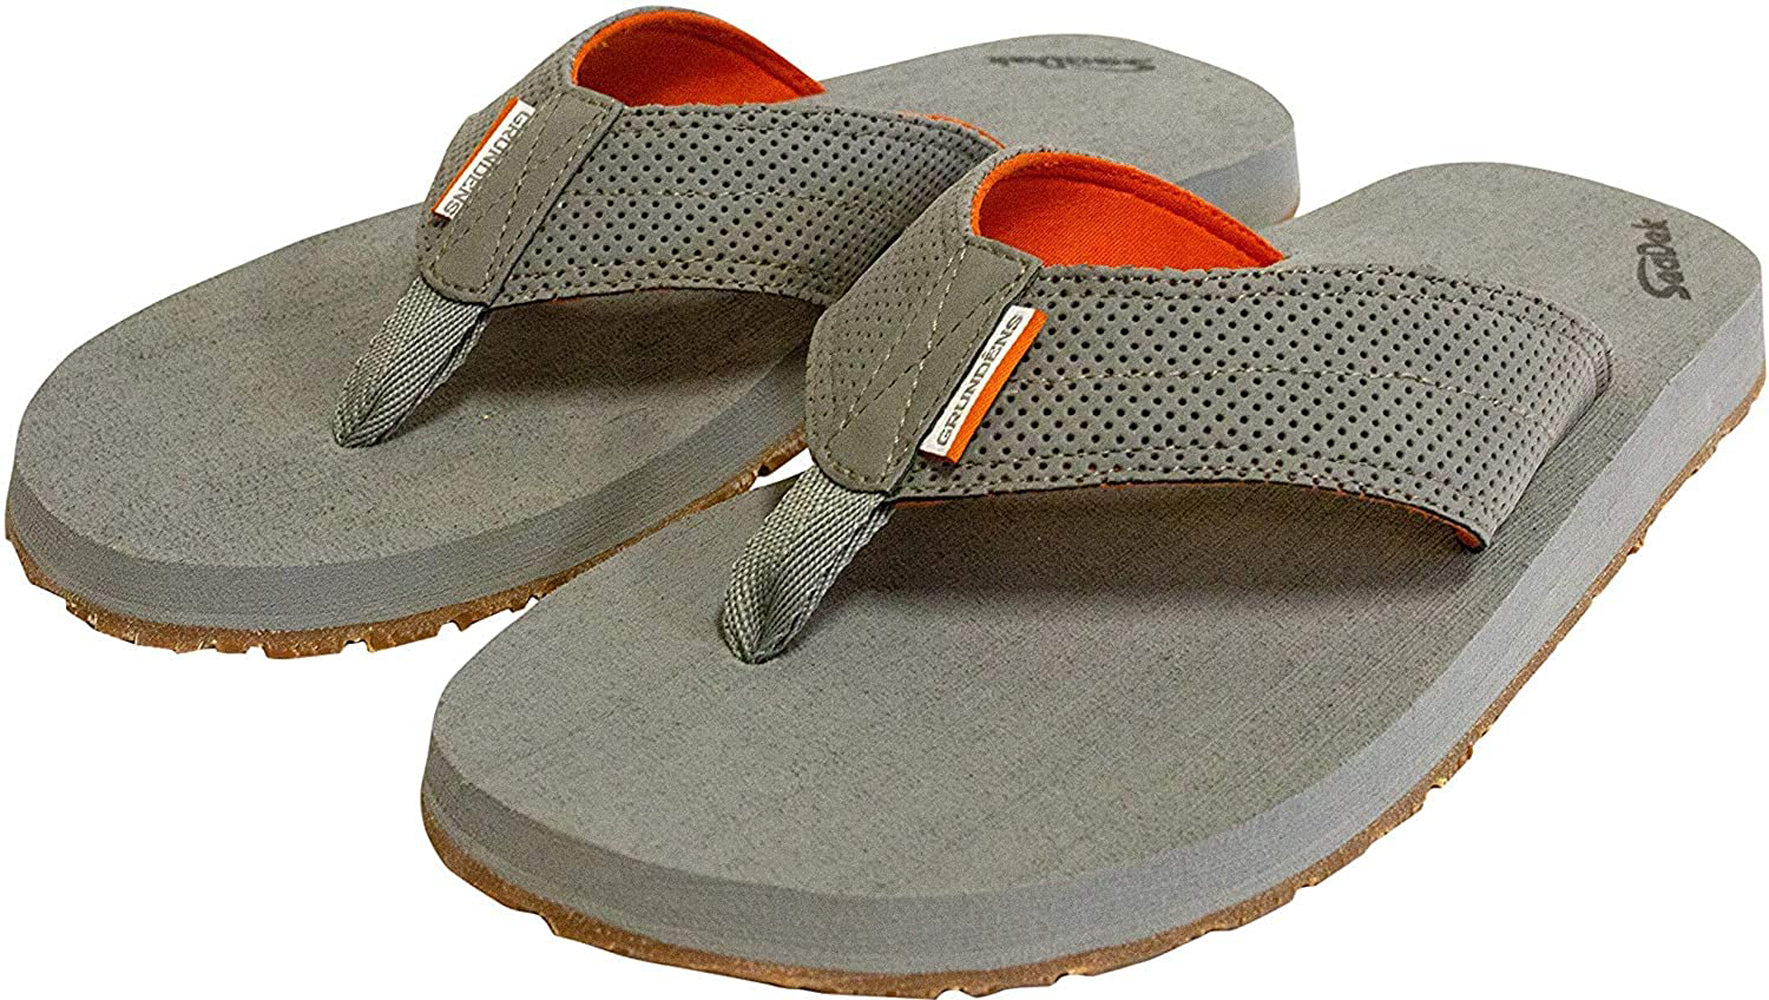 Deck Hand Sandal in Monument Grey color from the side view